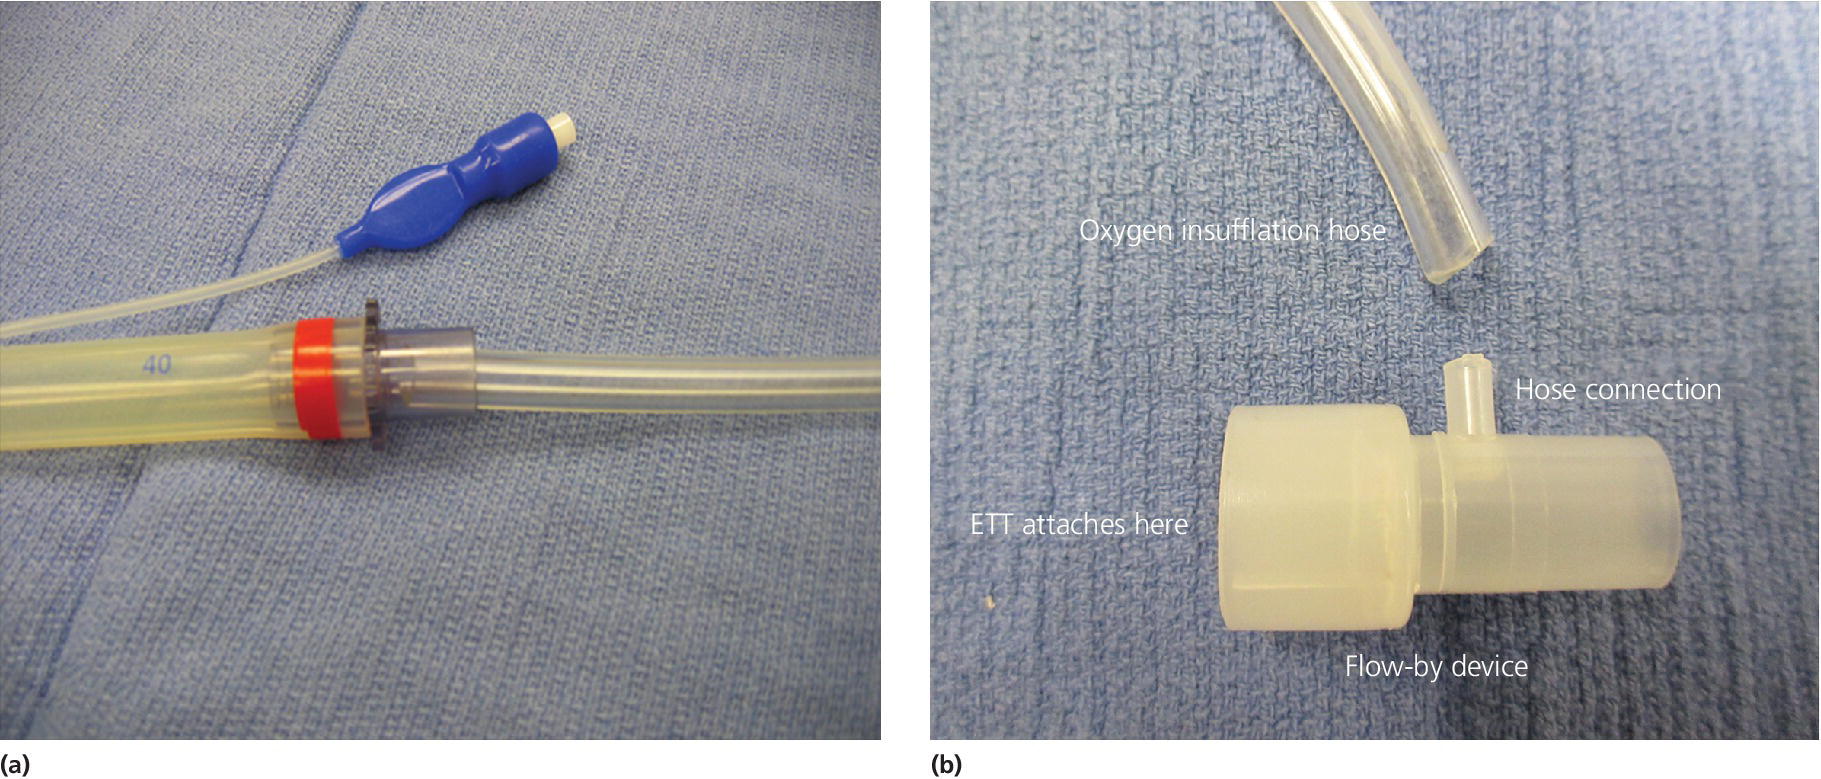 Photos of an insufflation hose in an endotracheal tube (left) and flow-by device with a hose connection and an oxygen insufflation hose to be attached (right).